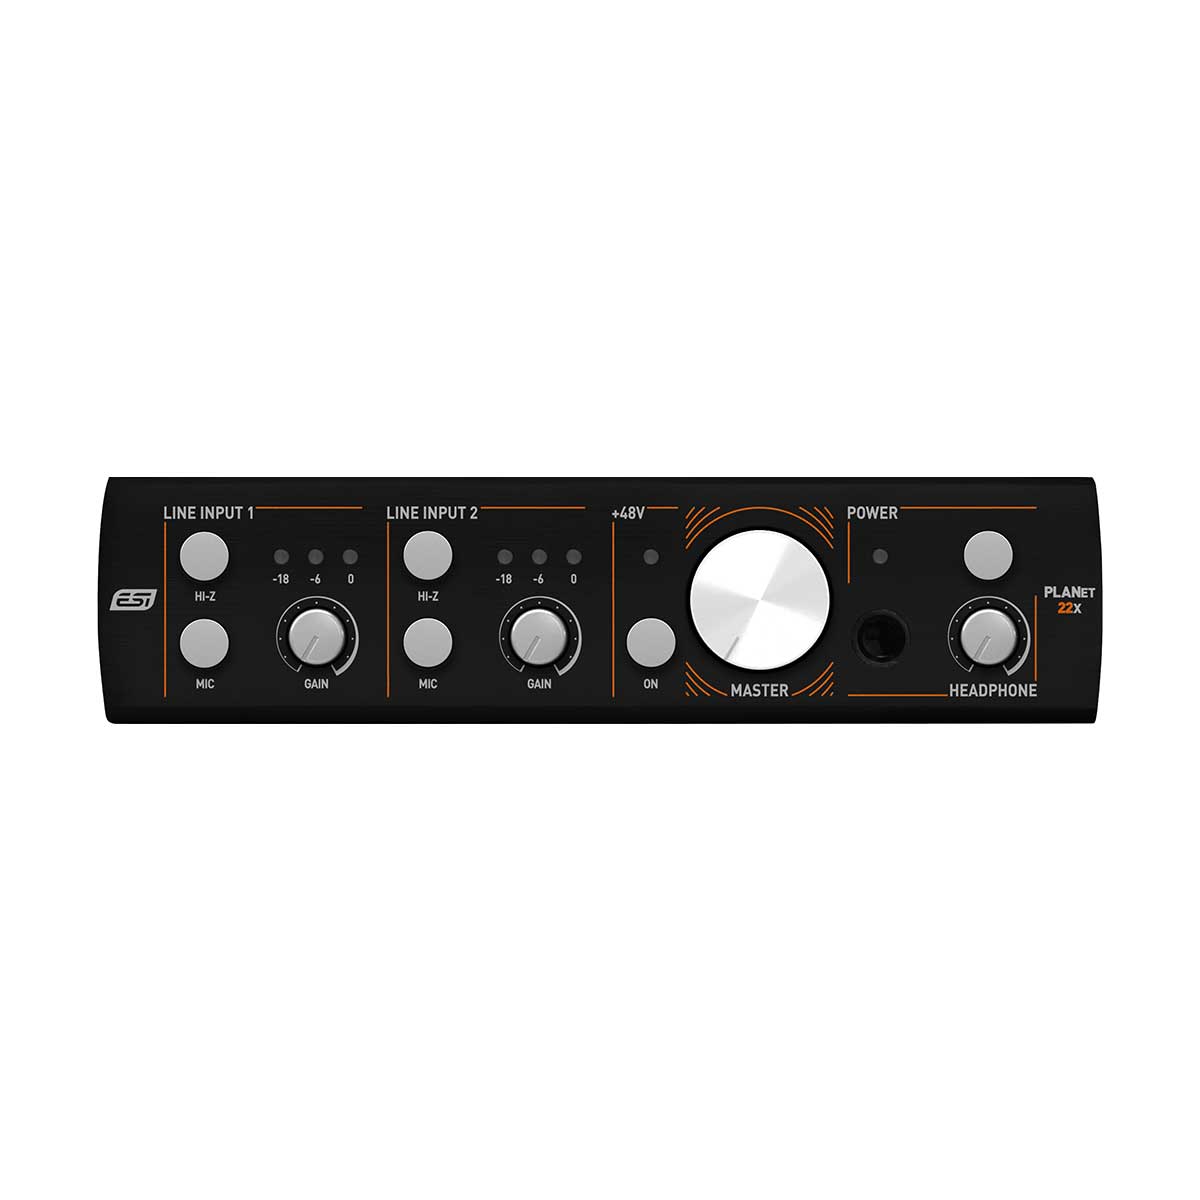 ESI planet 22x Professional Dante audio interface with 2 inputs / 2 outputs